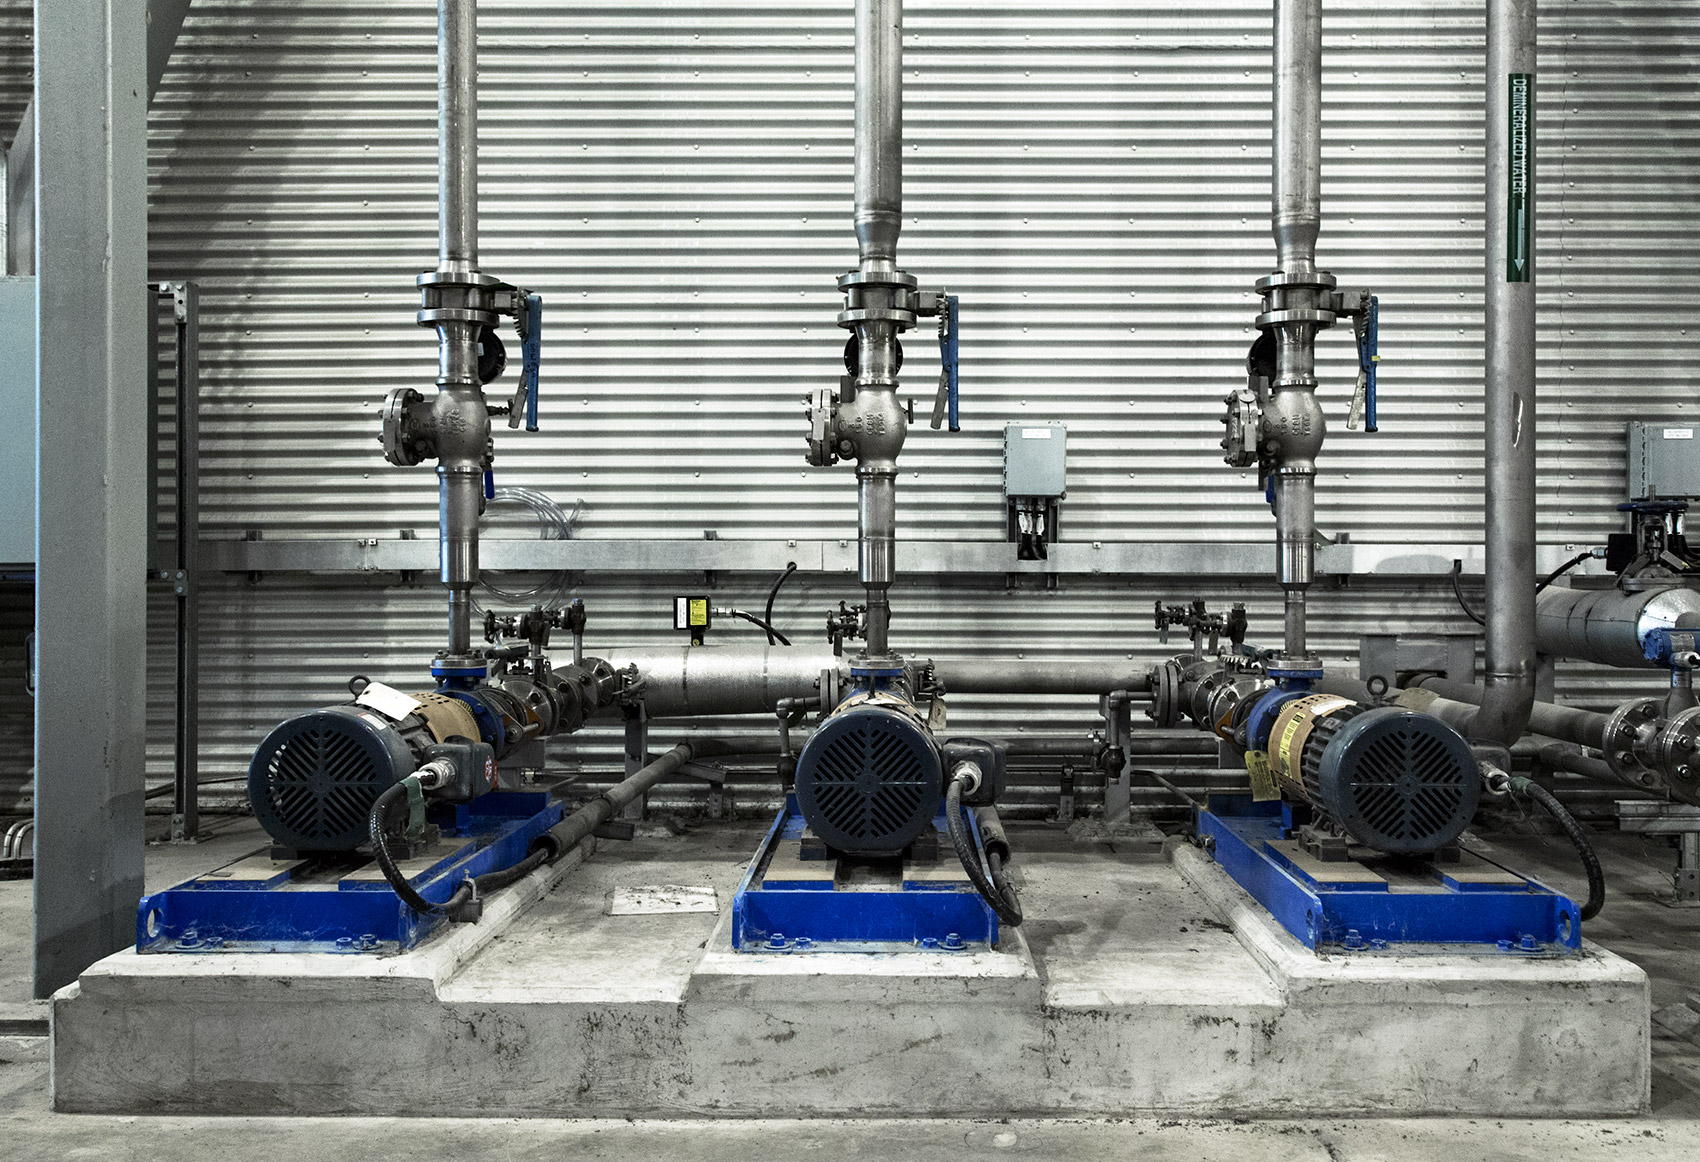 20150519. Metal pipes and valves are cool. See them in the Portl